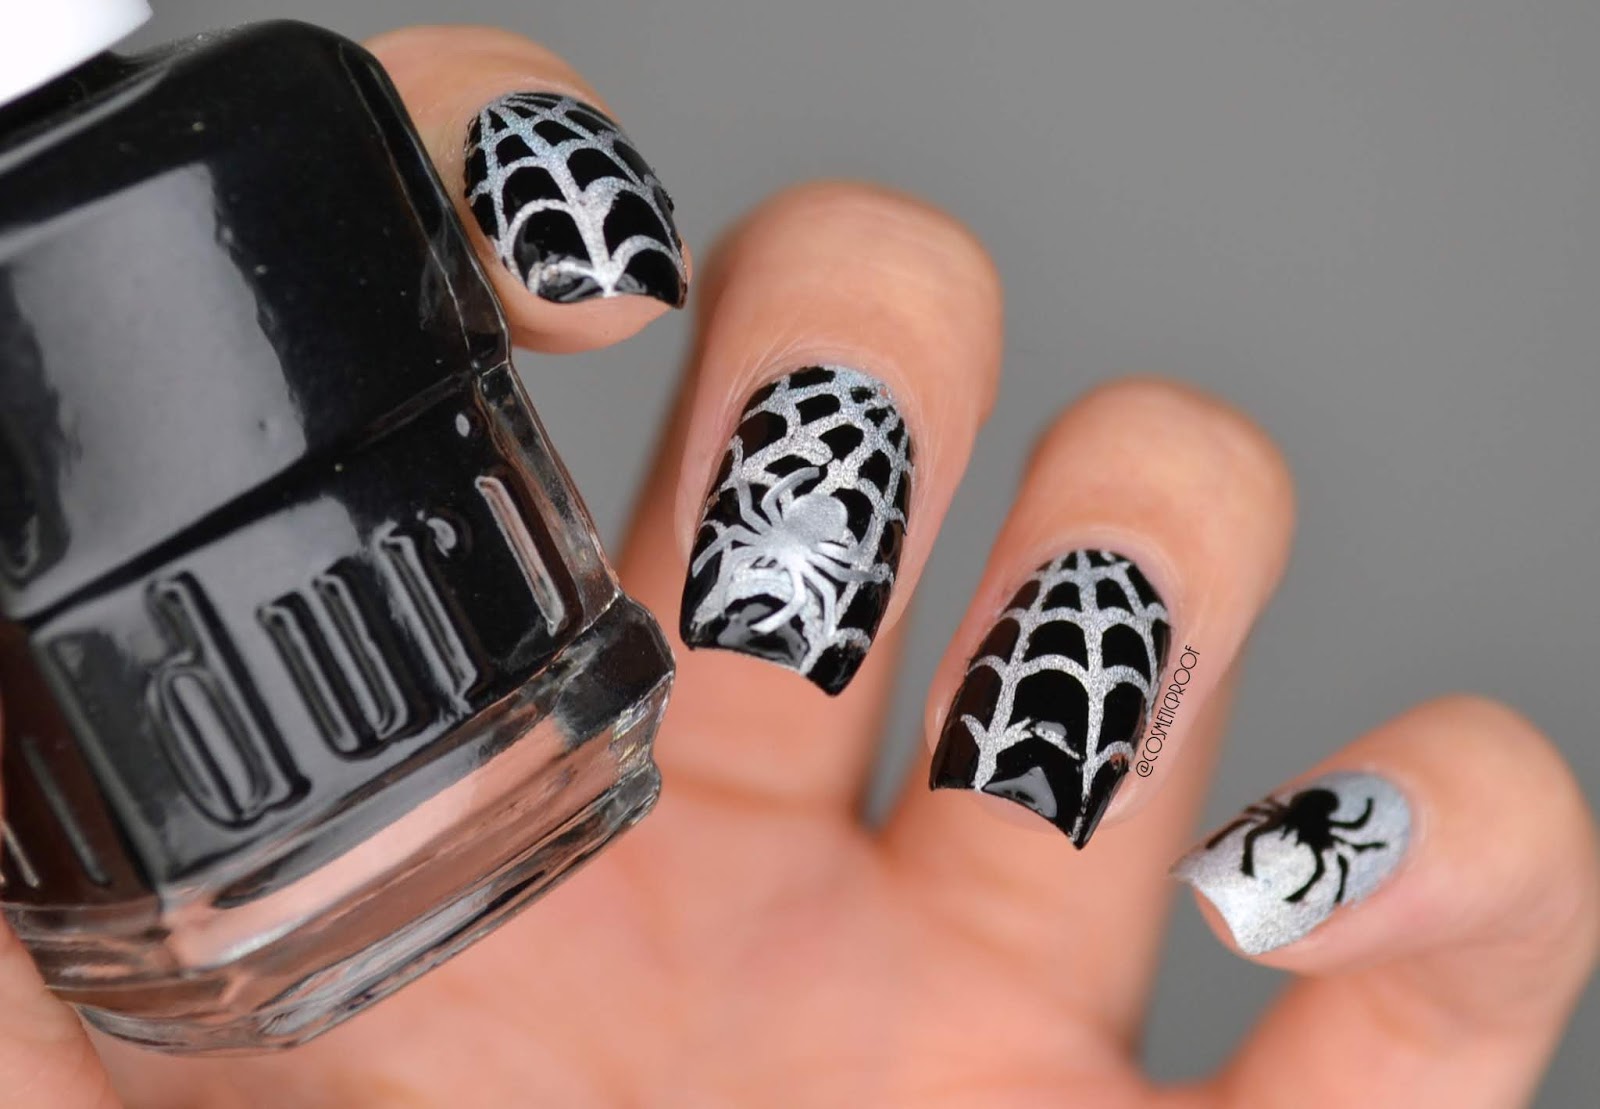 9. "Halloween Nail Design with Bat and Spiderweb Accents" - wide 2